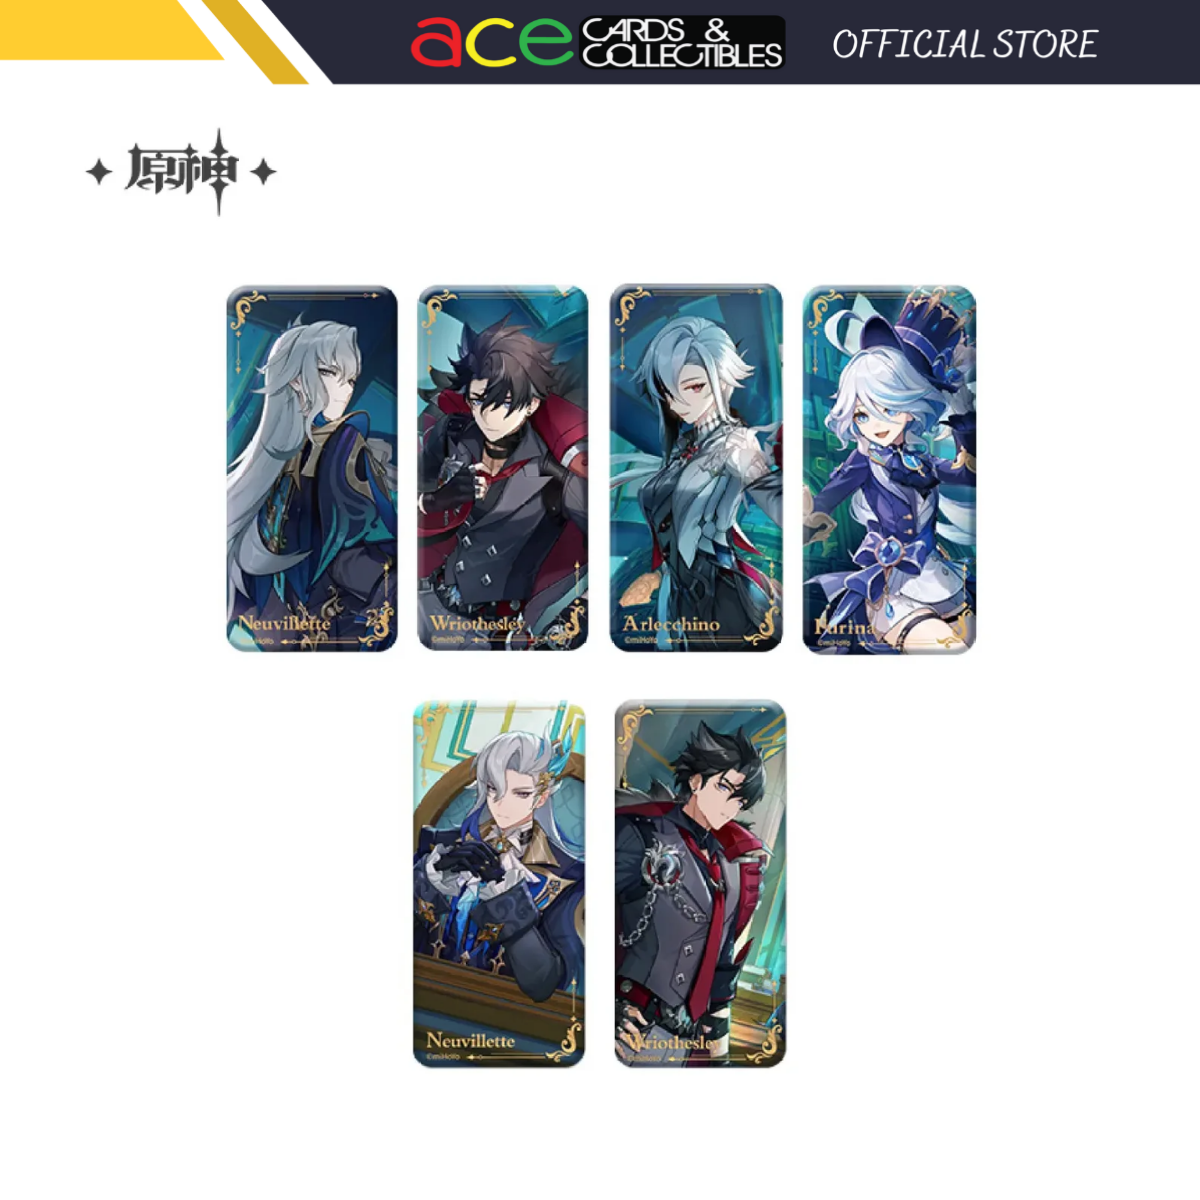 miHoYo Genshin Impact "To the Stars Shining in the Depths" Character Badge Series-Neuvillette-A-miHoYo-Ace Cards & Collectibles